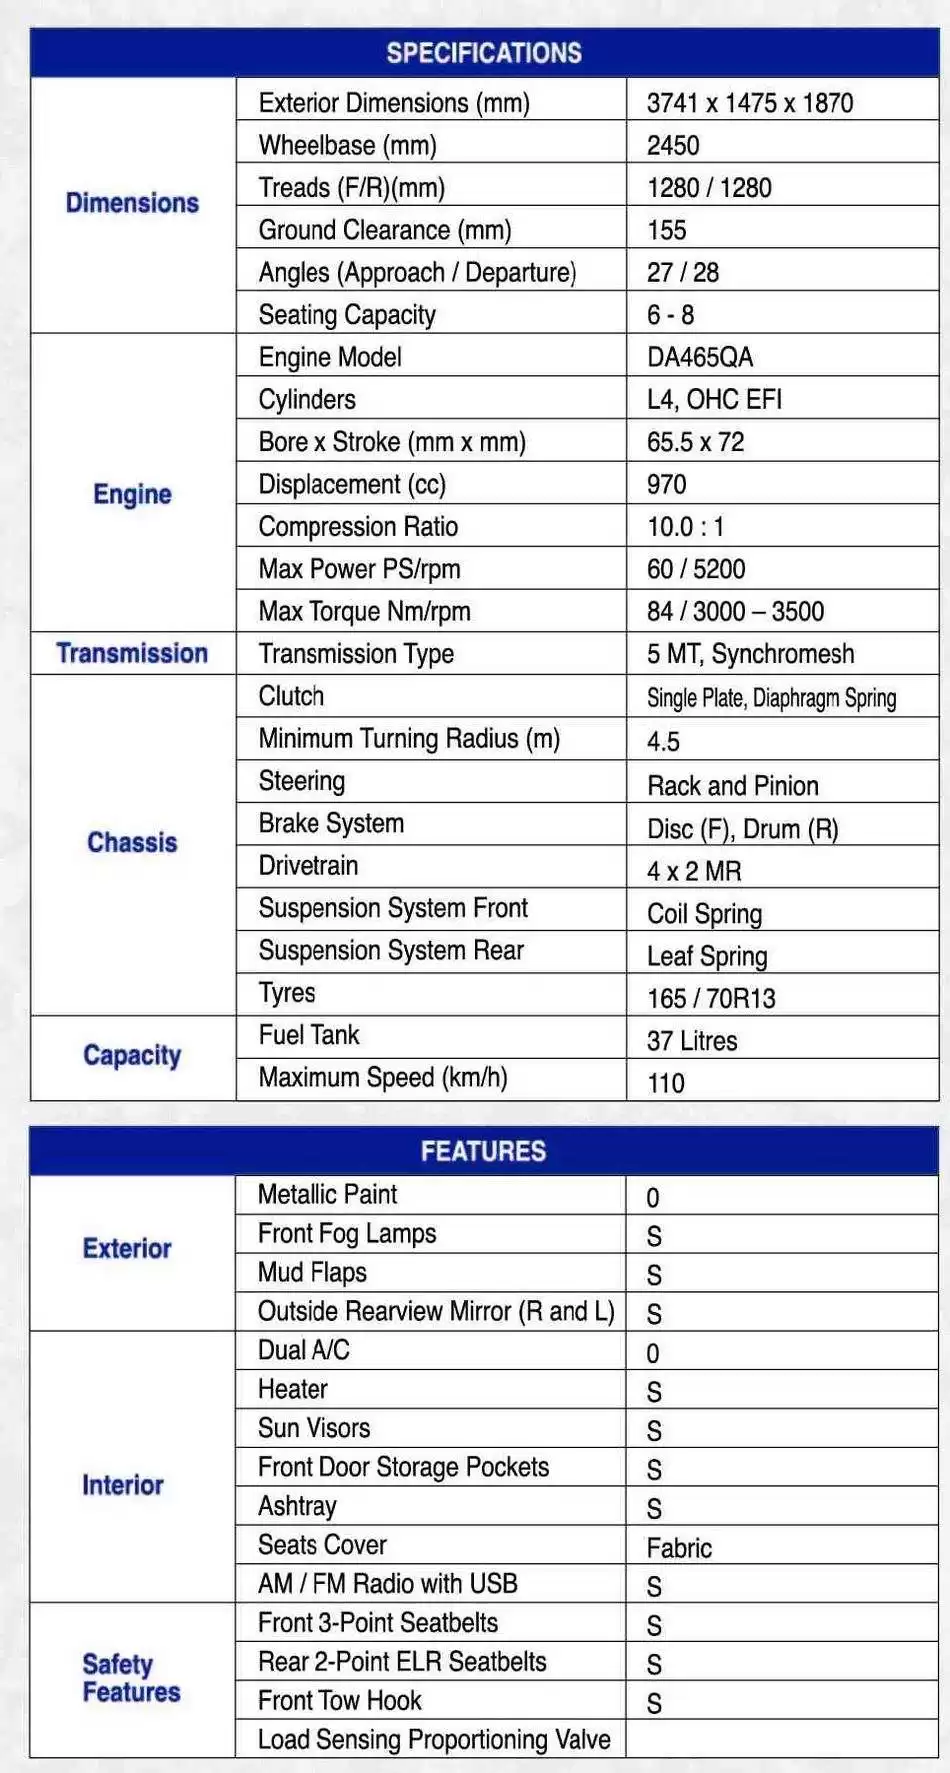 FAW XPV Specifications